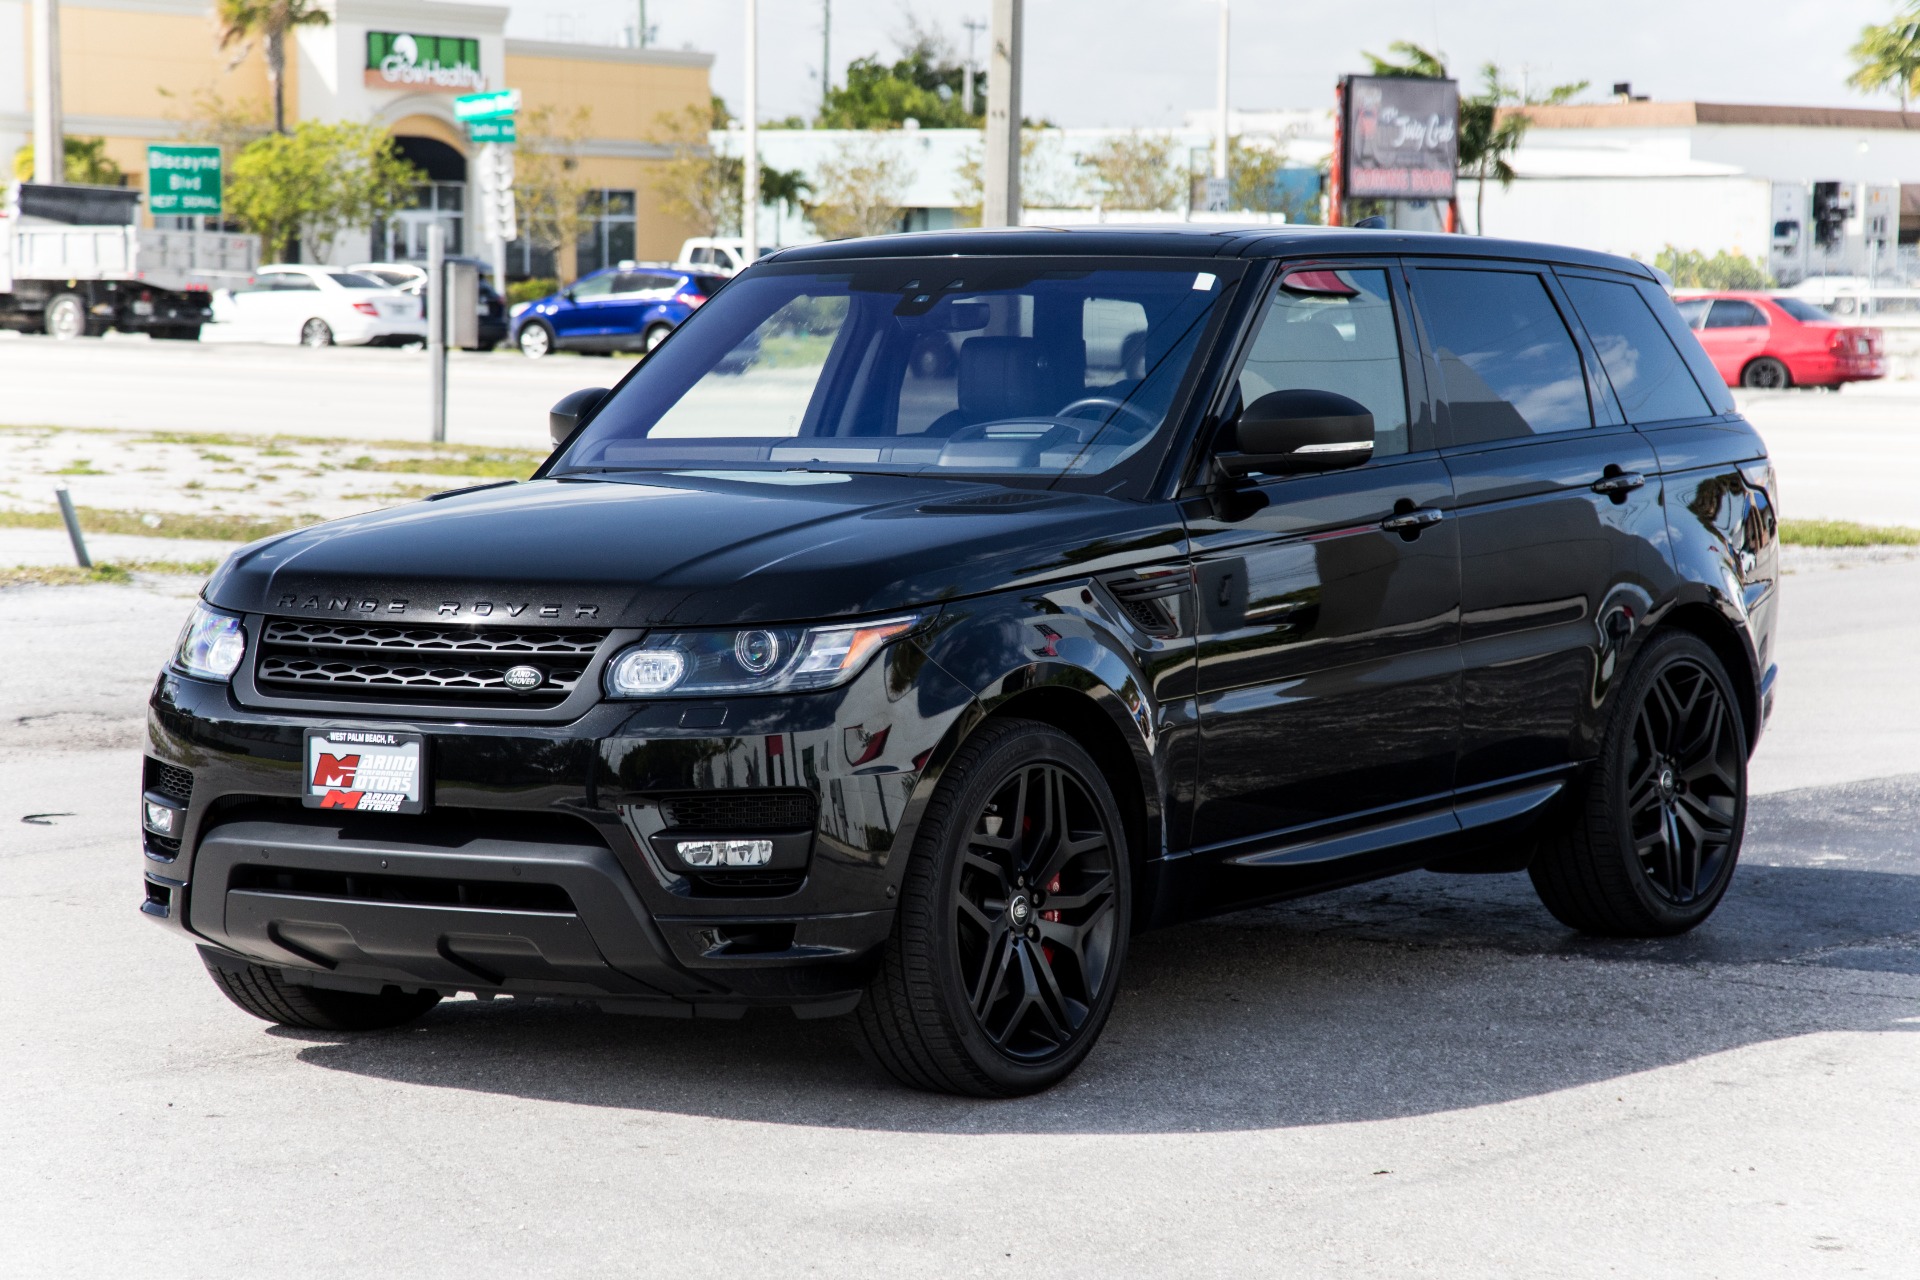 Used 2017 Land Rover Range Rover Sport Autobiography For